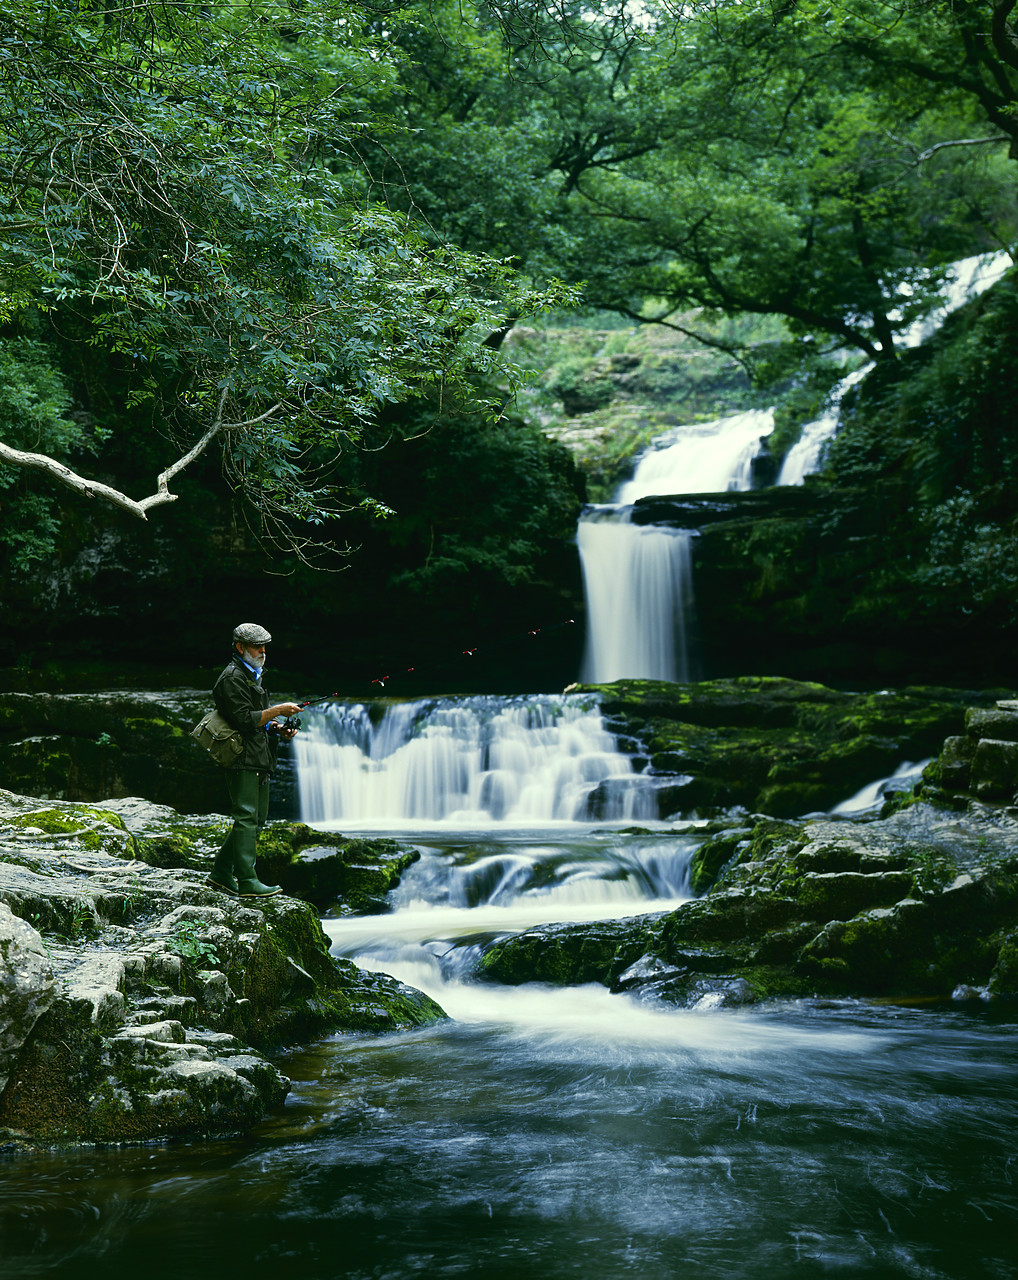 #85414 - Trout Fisherman, Vale of Neath, West Glamorgan, Wales